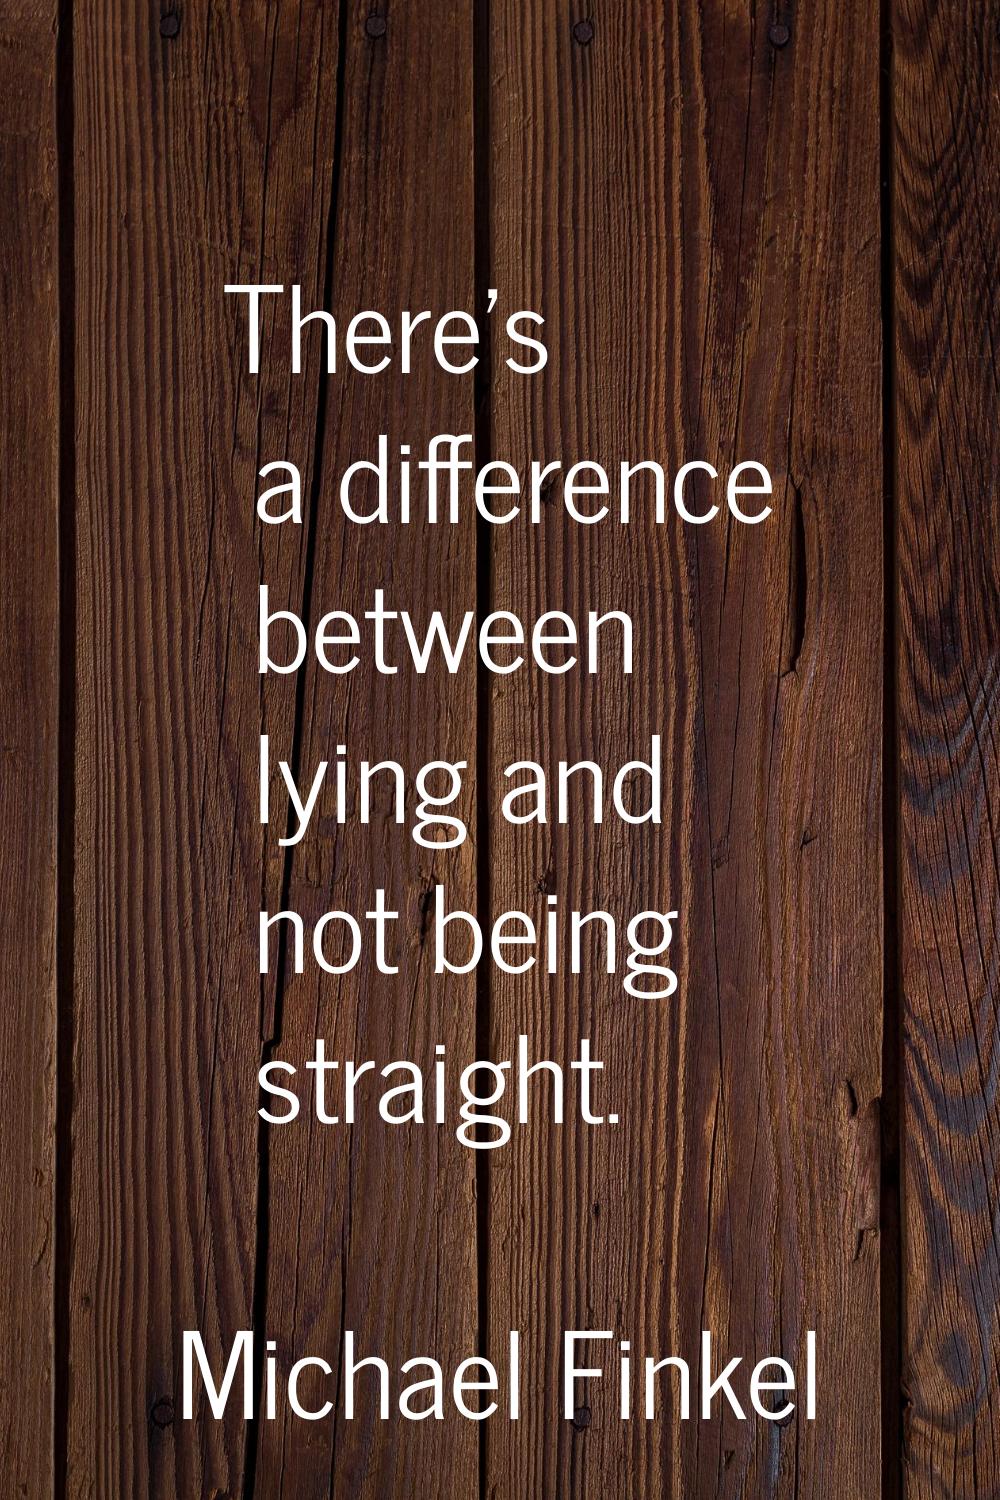 There's a difference between lying and not being straight.